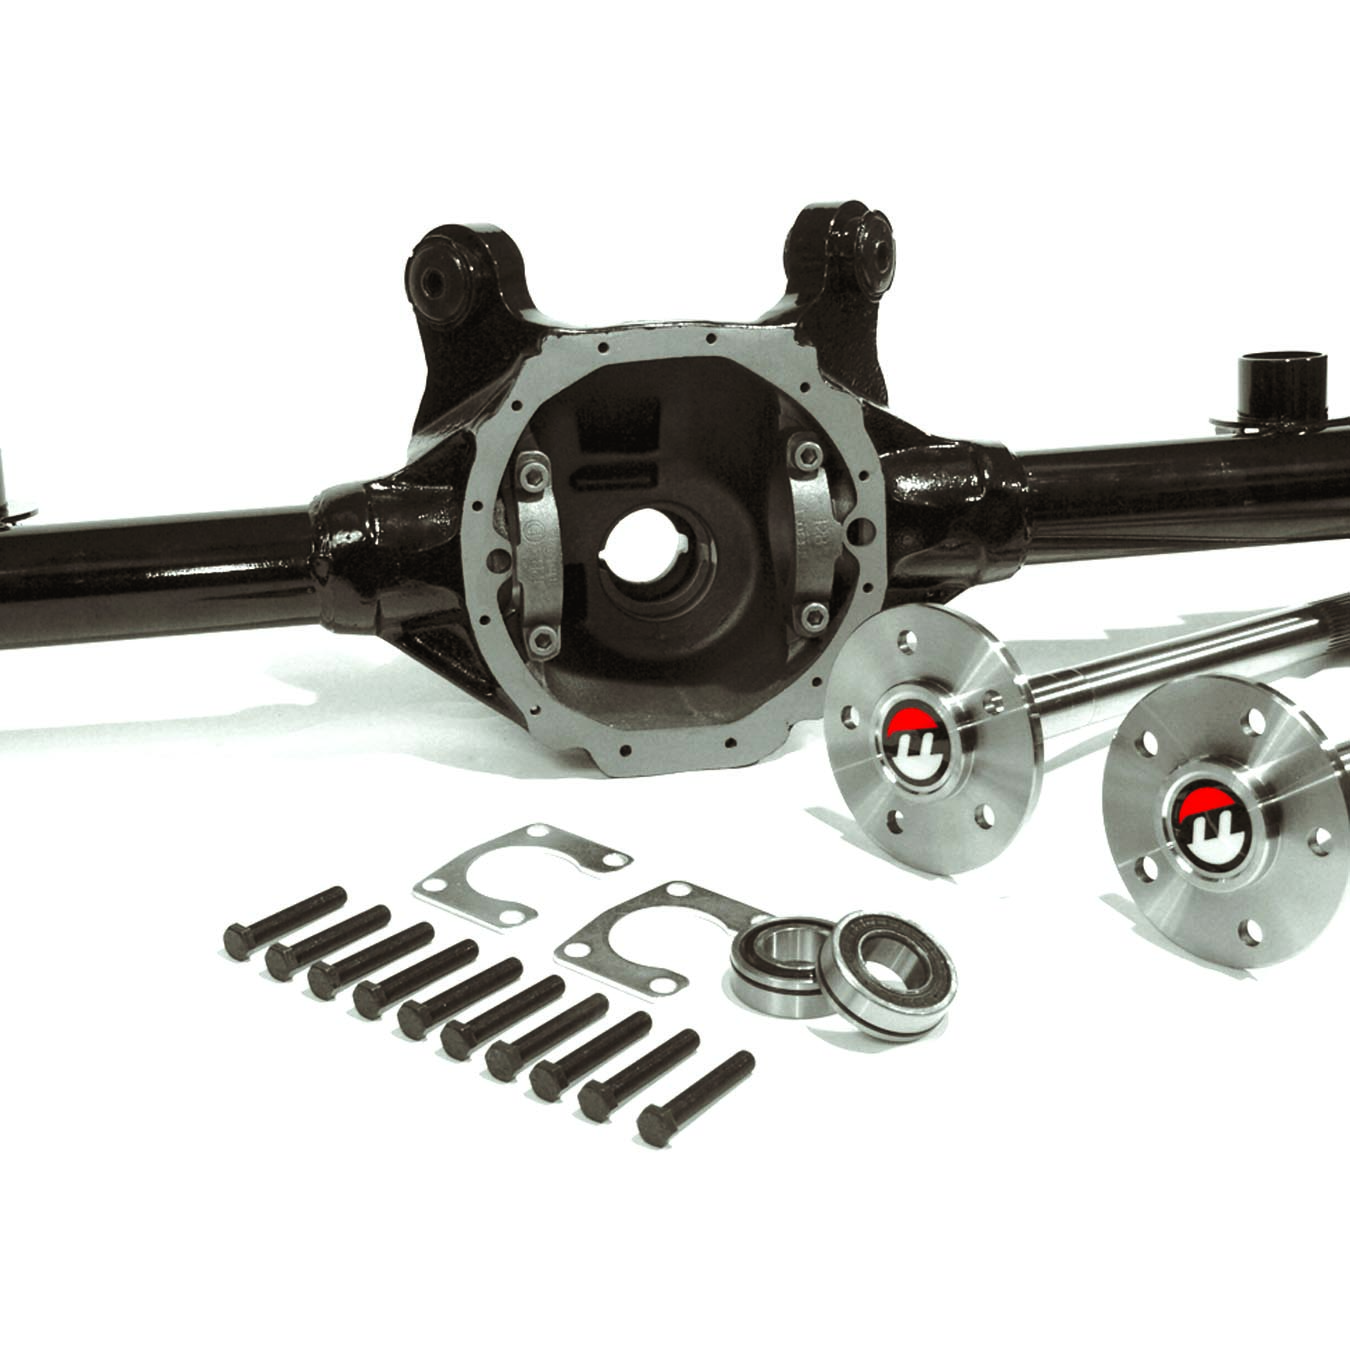 12 Bolt Built to Order Housing & Axle Package